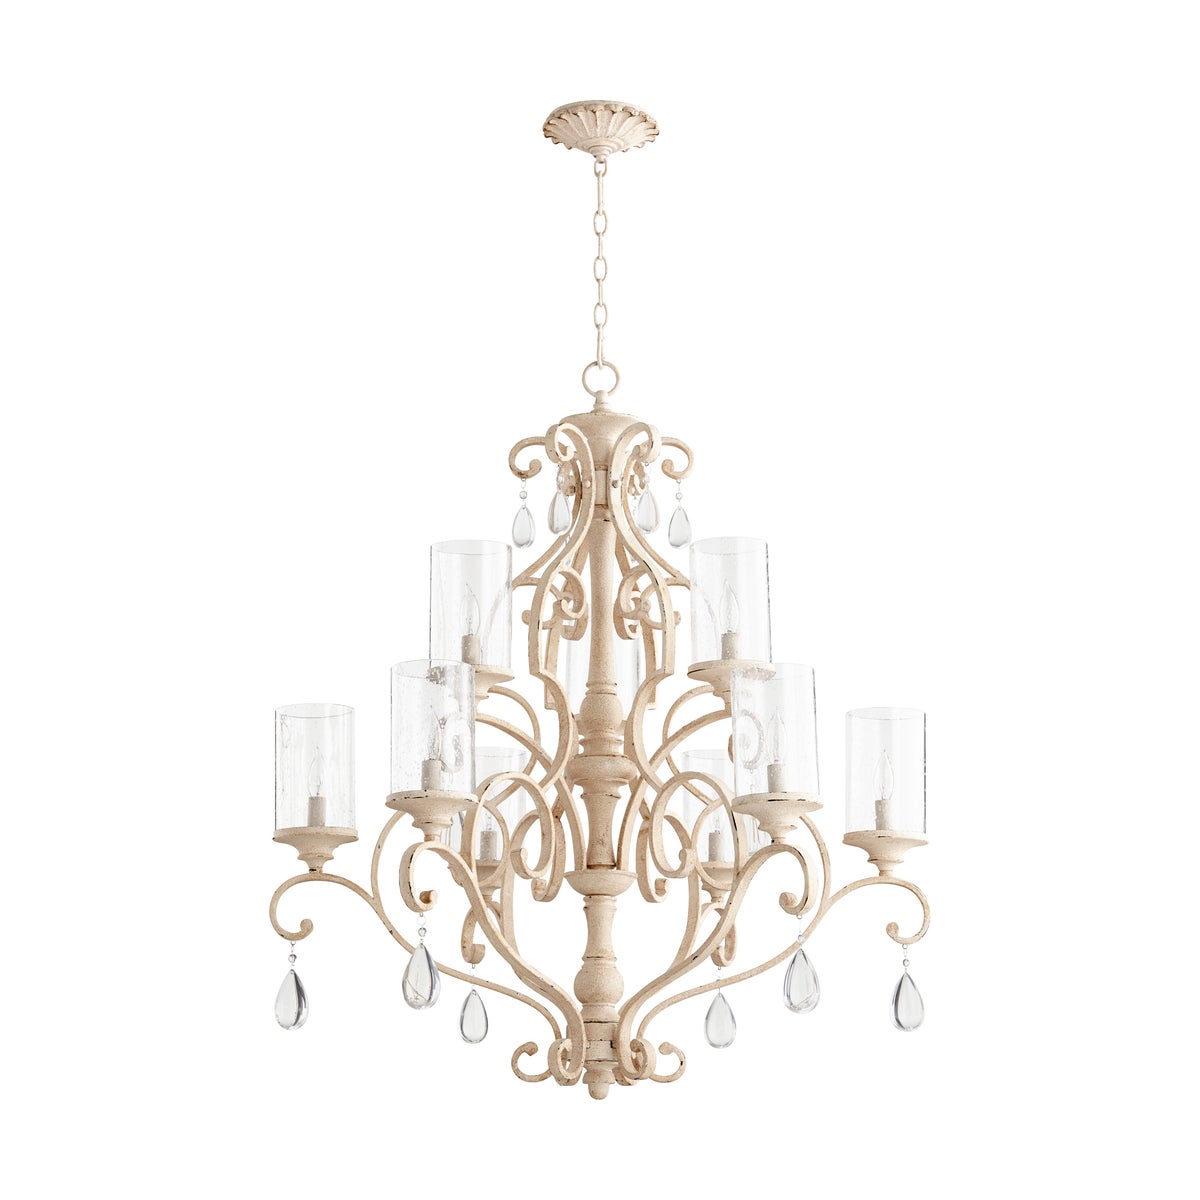 San Miguel 9 Light Persian White  Traditional Chandelier